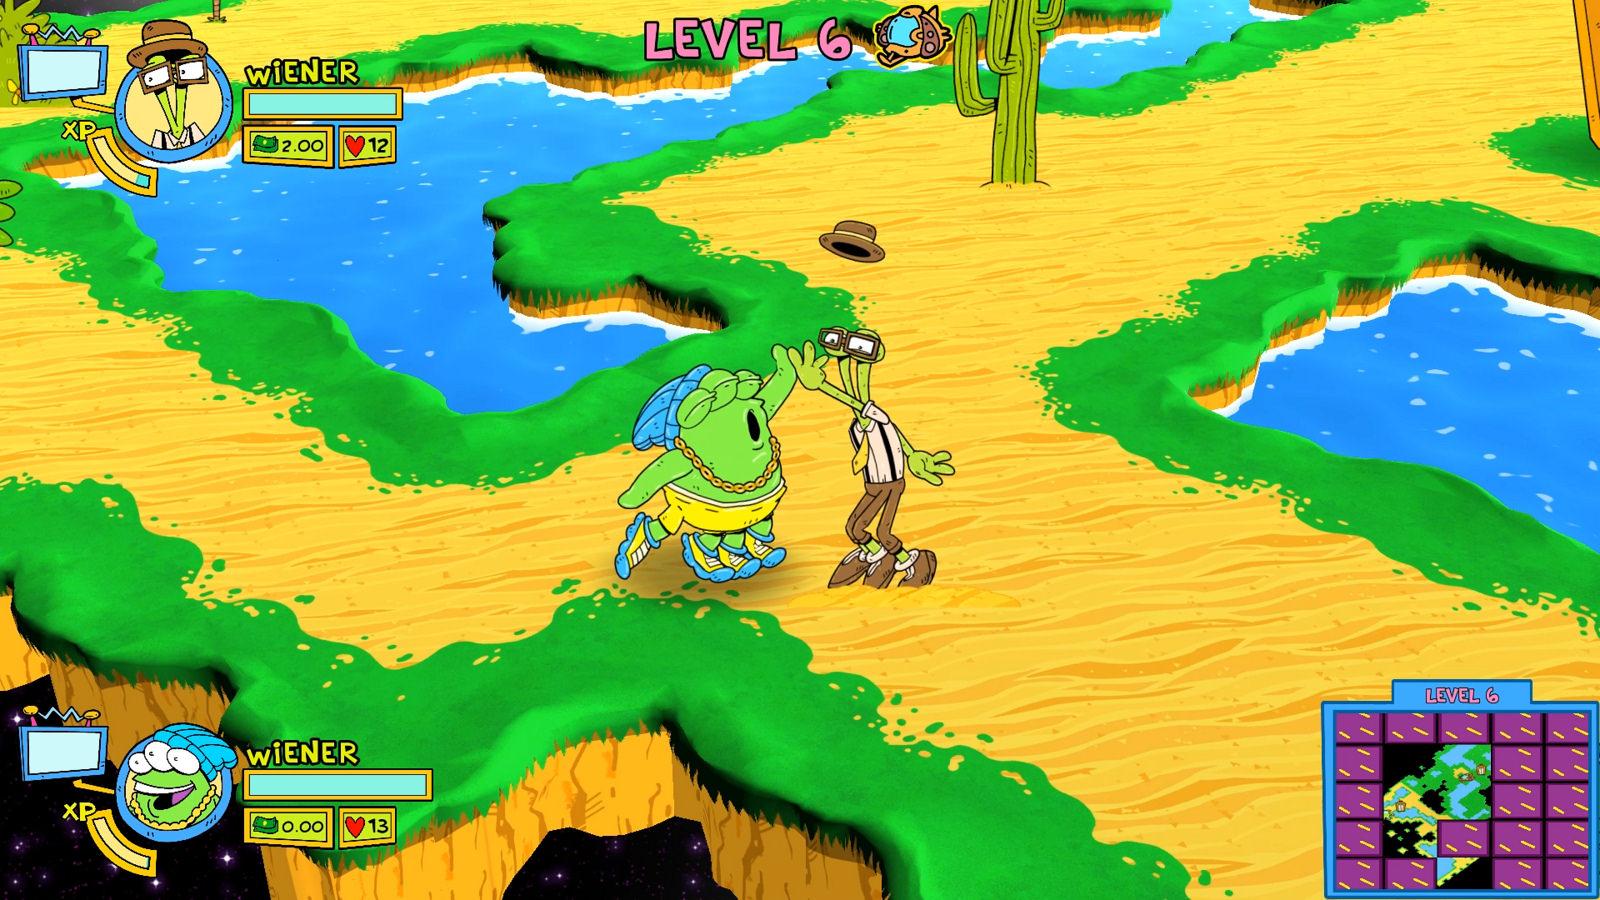 ToeJam & Earl are Back with a Funky New